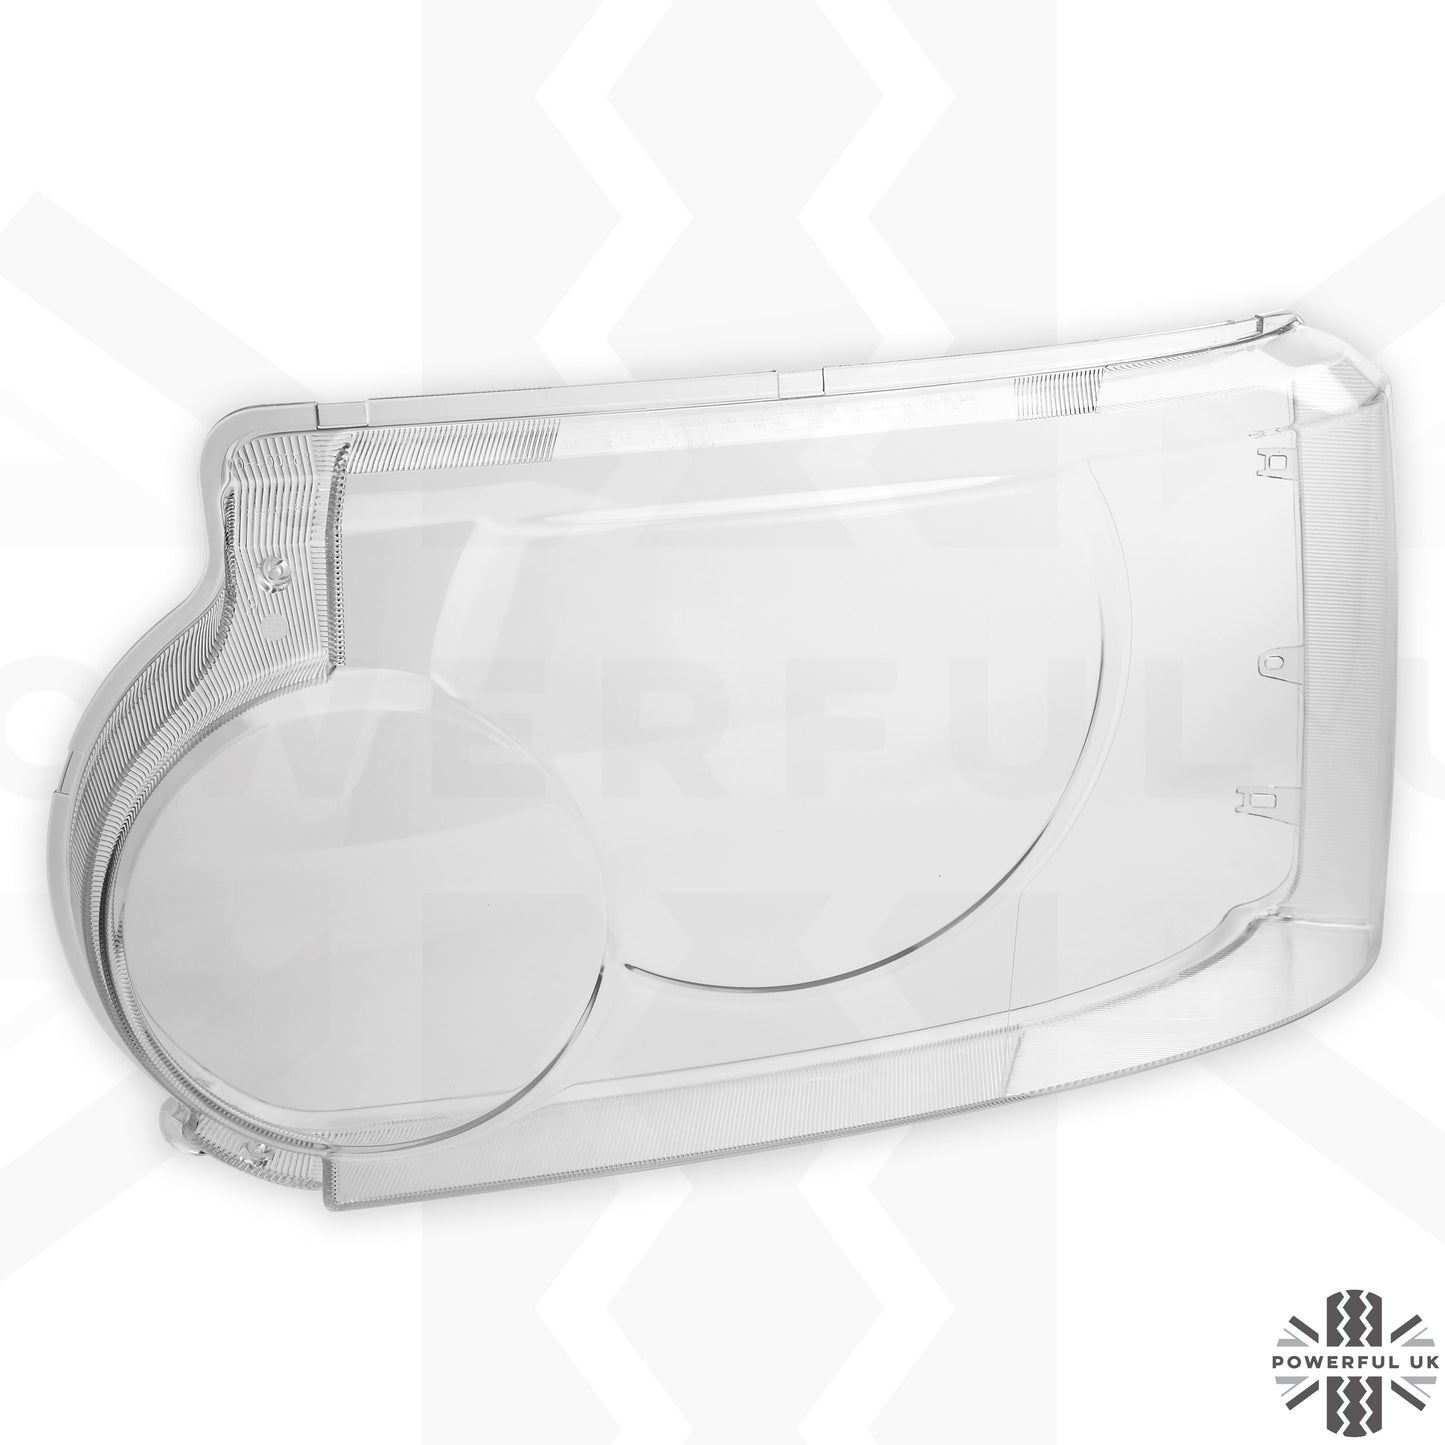 Replacement Headlight Lens for Range Rover L322 (2006-09) - LH